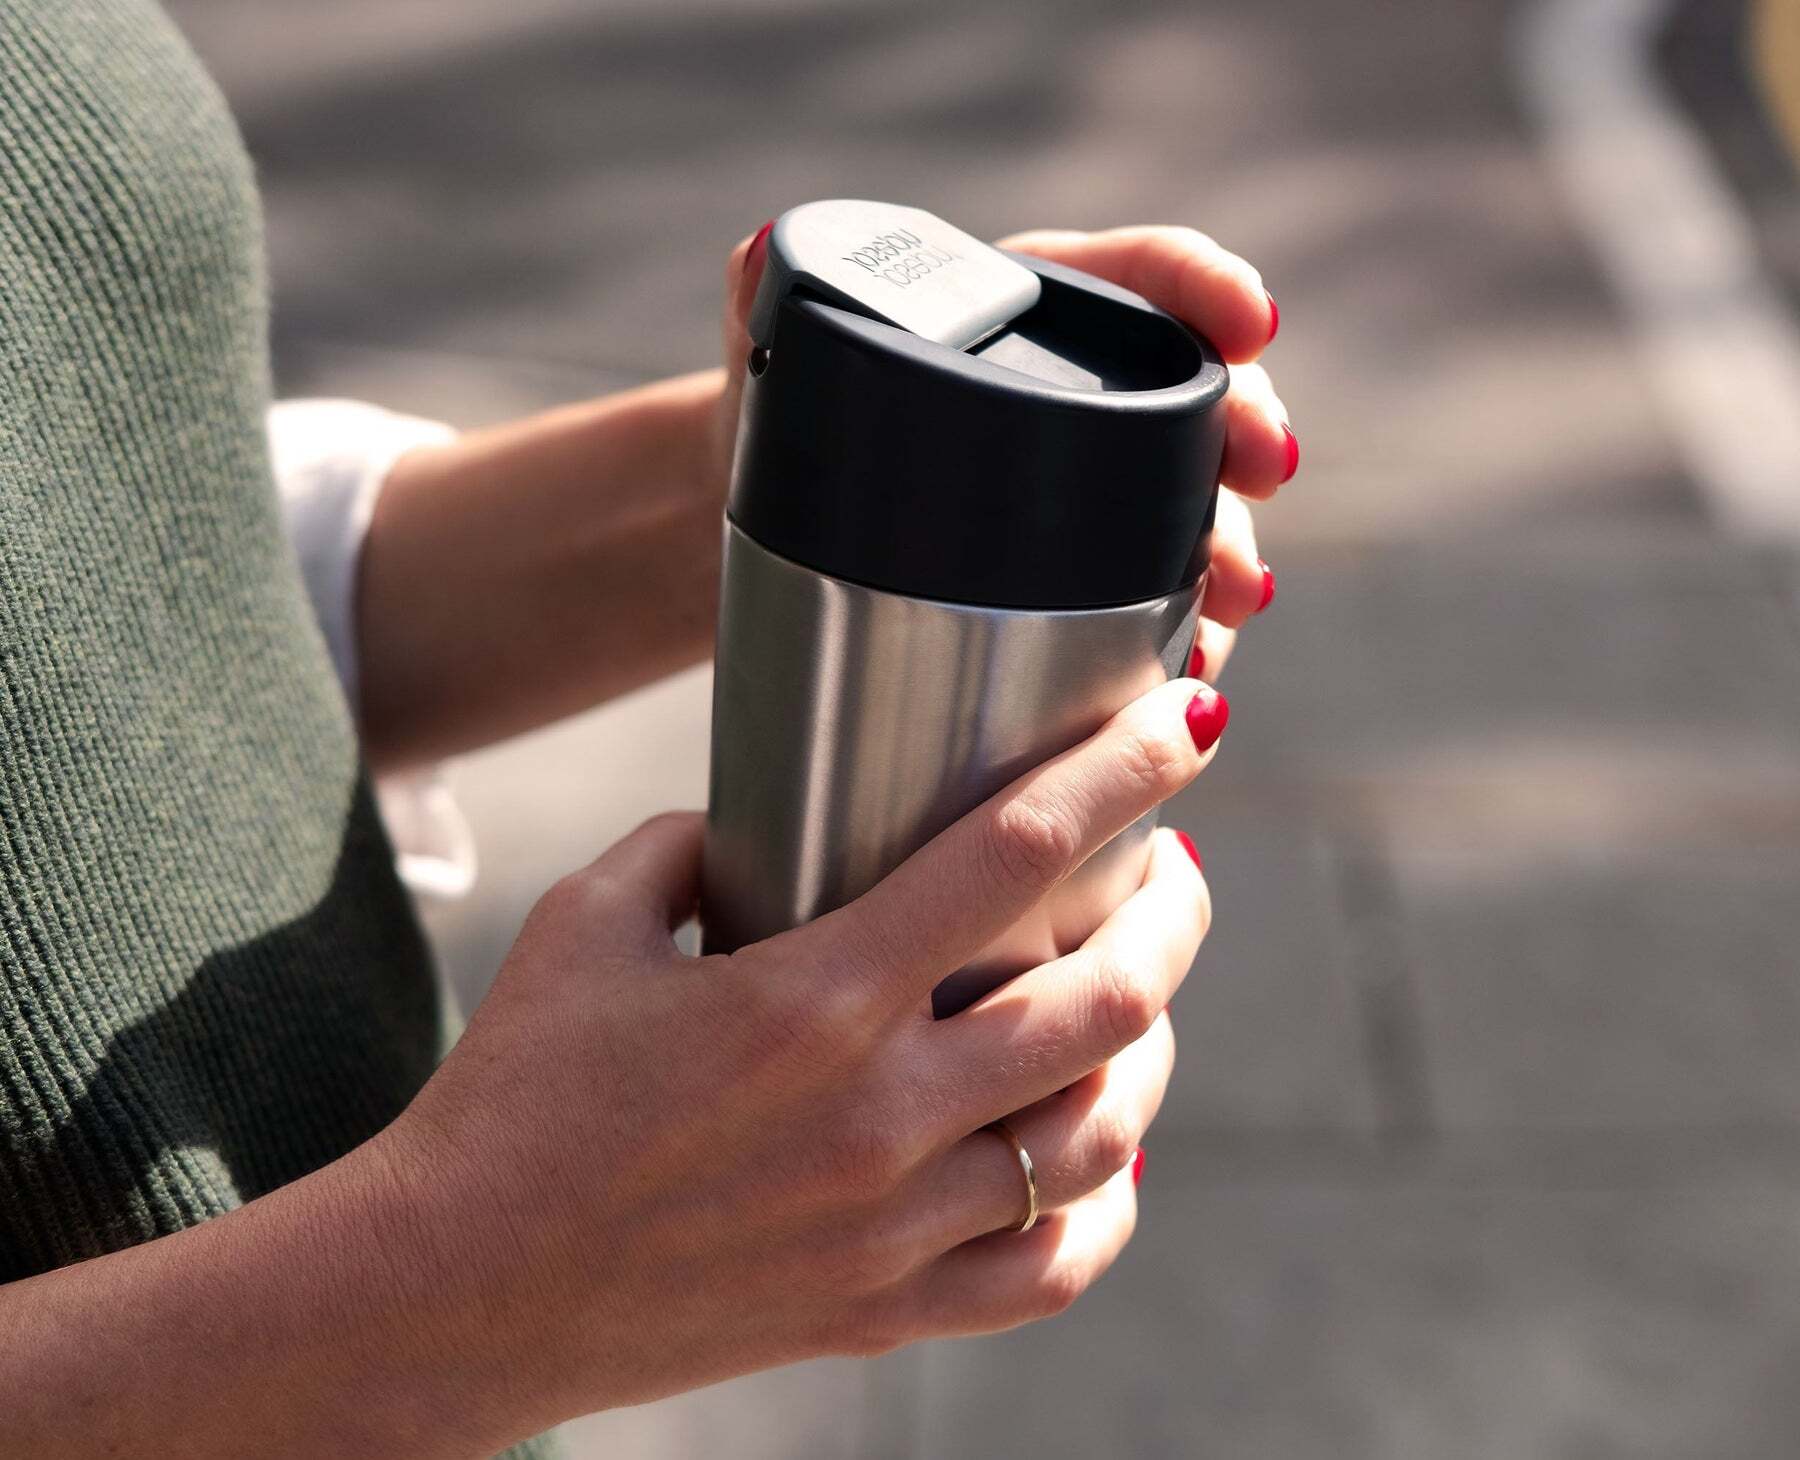 Insulated Thermal Mug Review: Perfect for Her On-the-Go Lifestyle